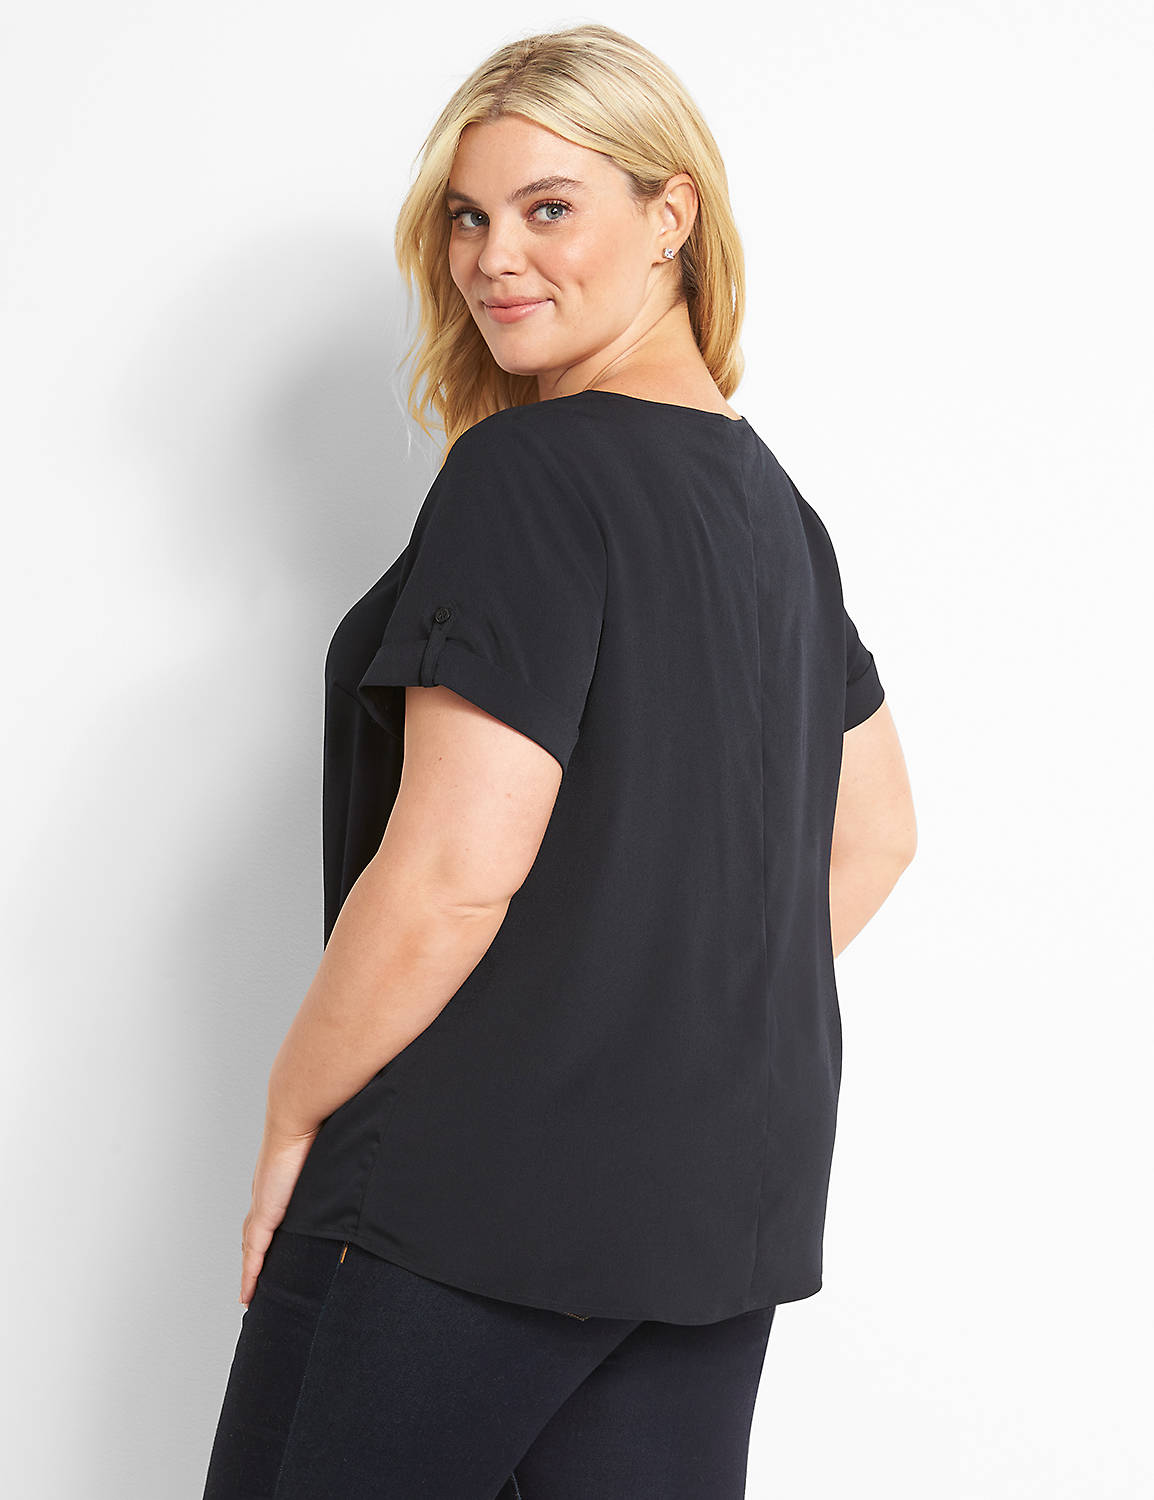 Short Sleeve Roll Cuff Crew Neck Top 1122473:Ascena Black:14 Product Image 2